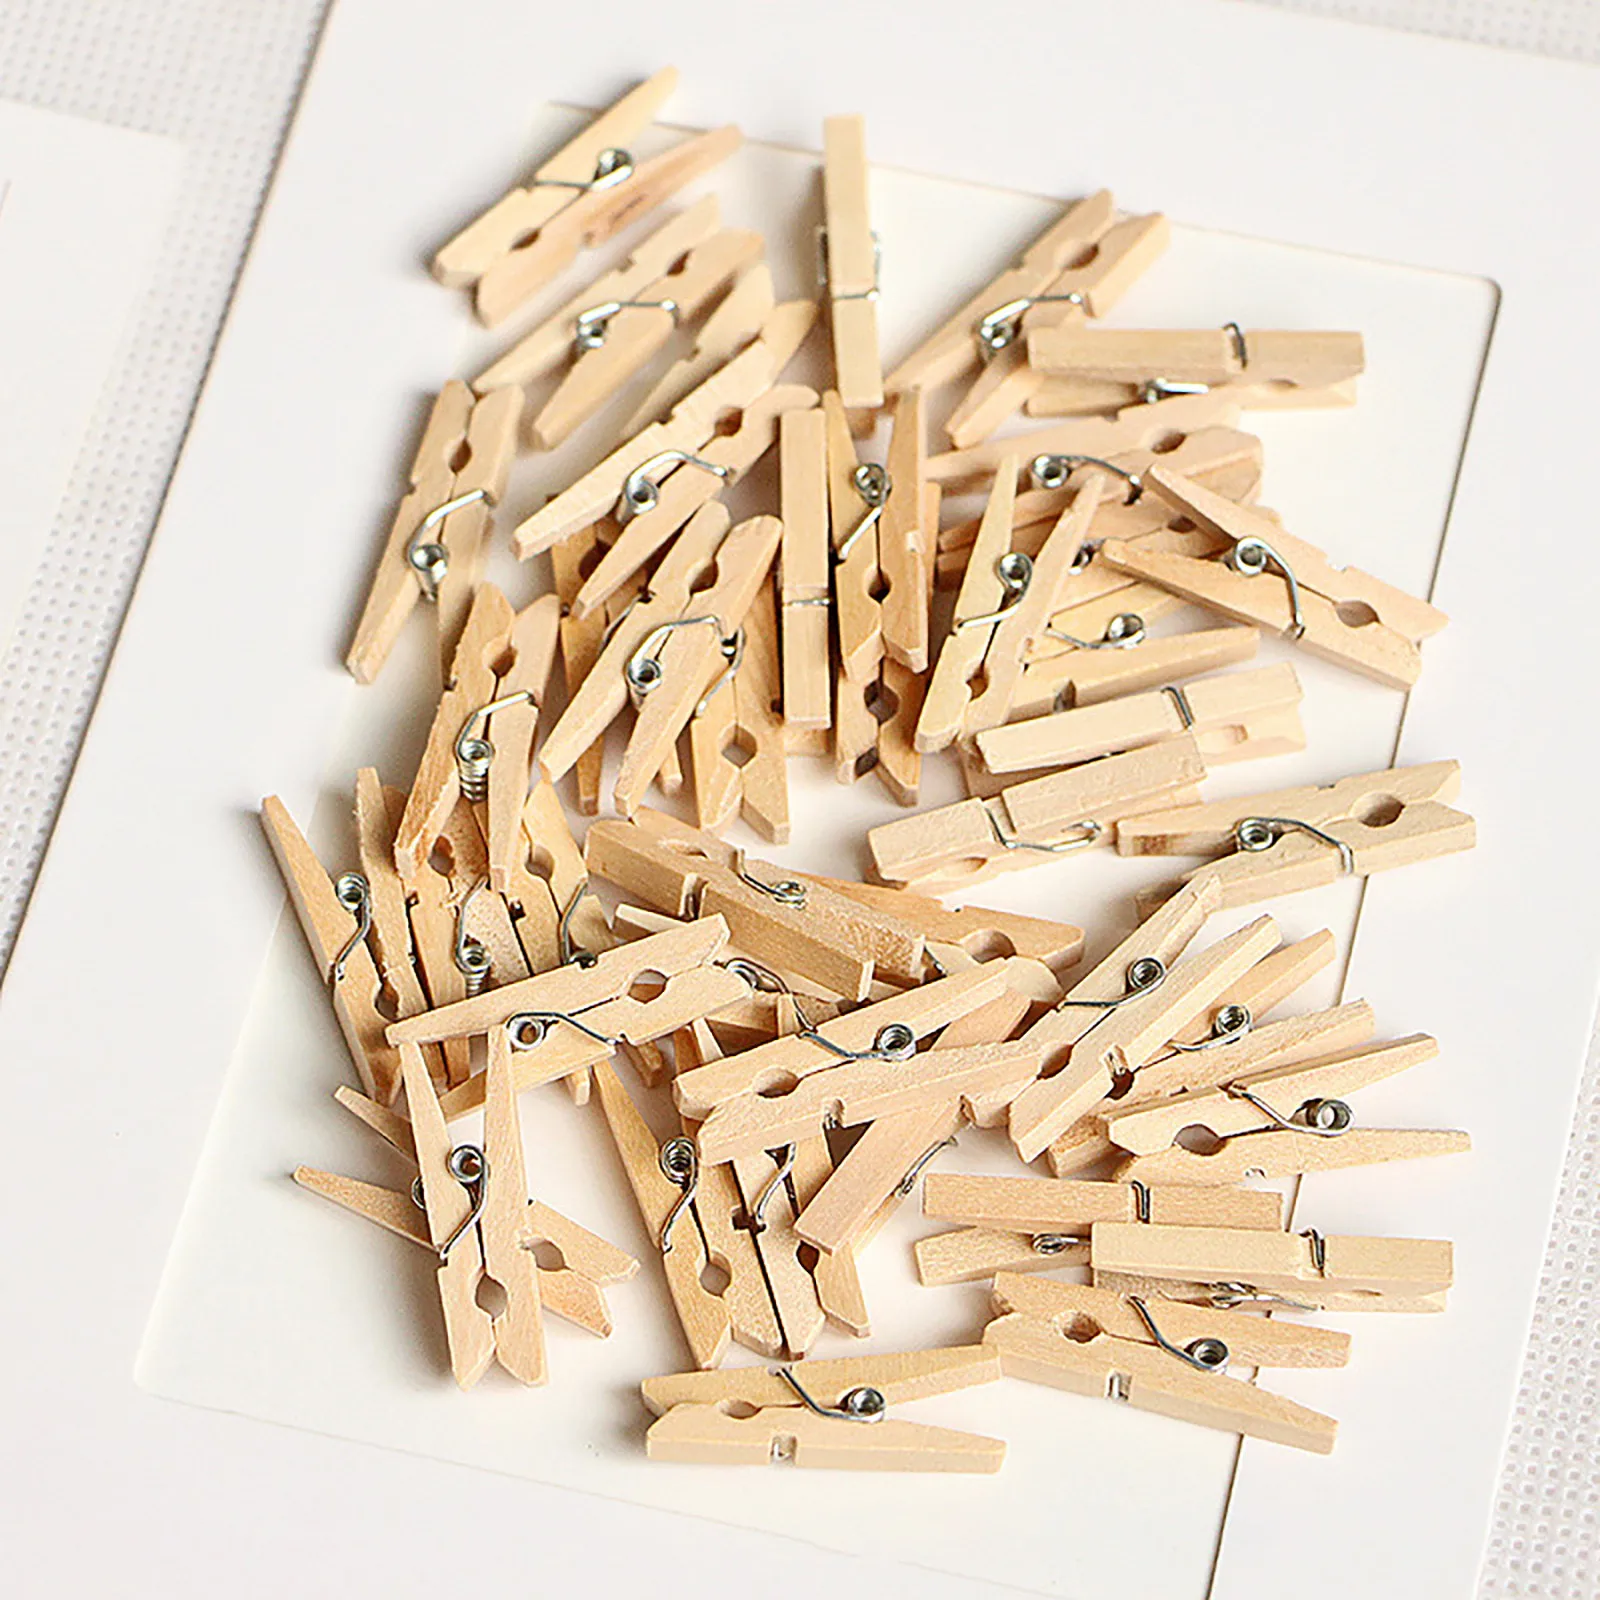 Multicolor eZAKKA Mini Wooden Photo Clips Clothes Pegs Pins Clothespins Natural Craft Clip with Jute Twine for Paper Photo Hanging,100 Pieces and 10 Meters Twines of Pack 